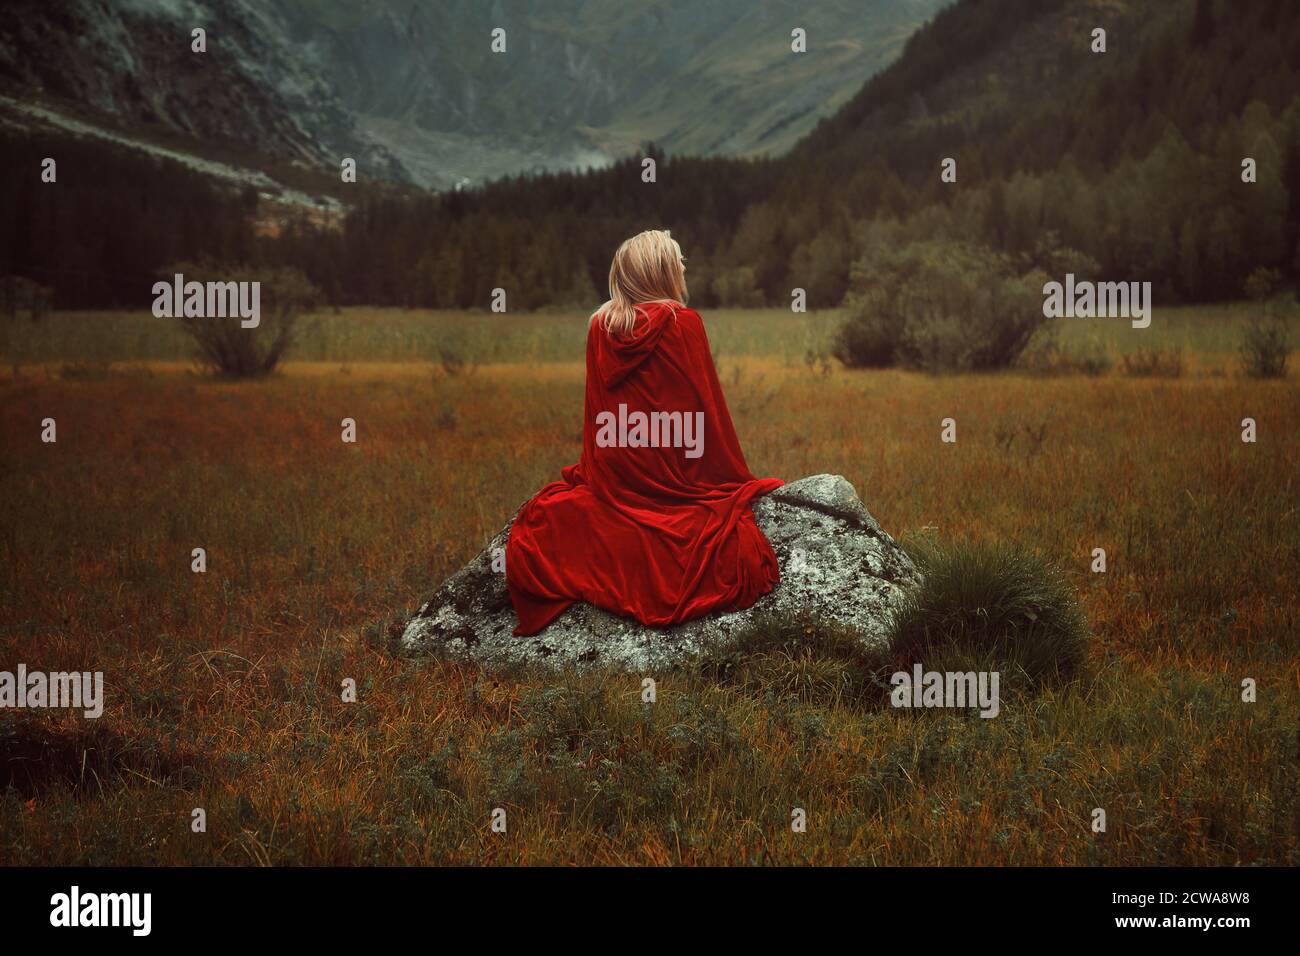 Blond woman with red cloak. Alone on a rock Stock Photo